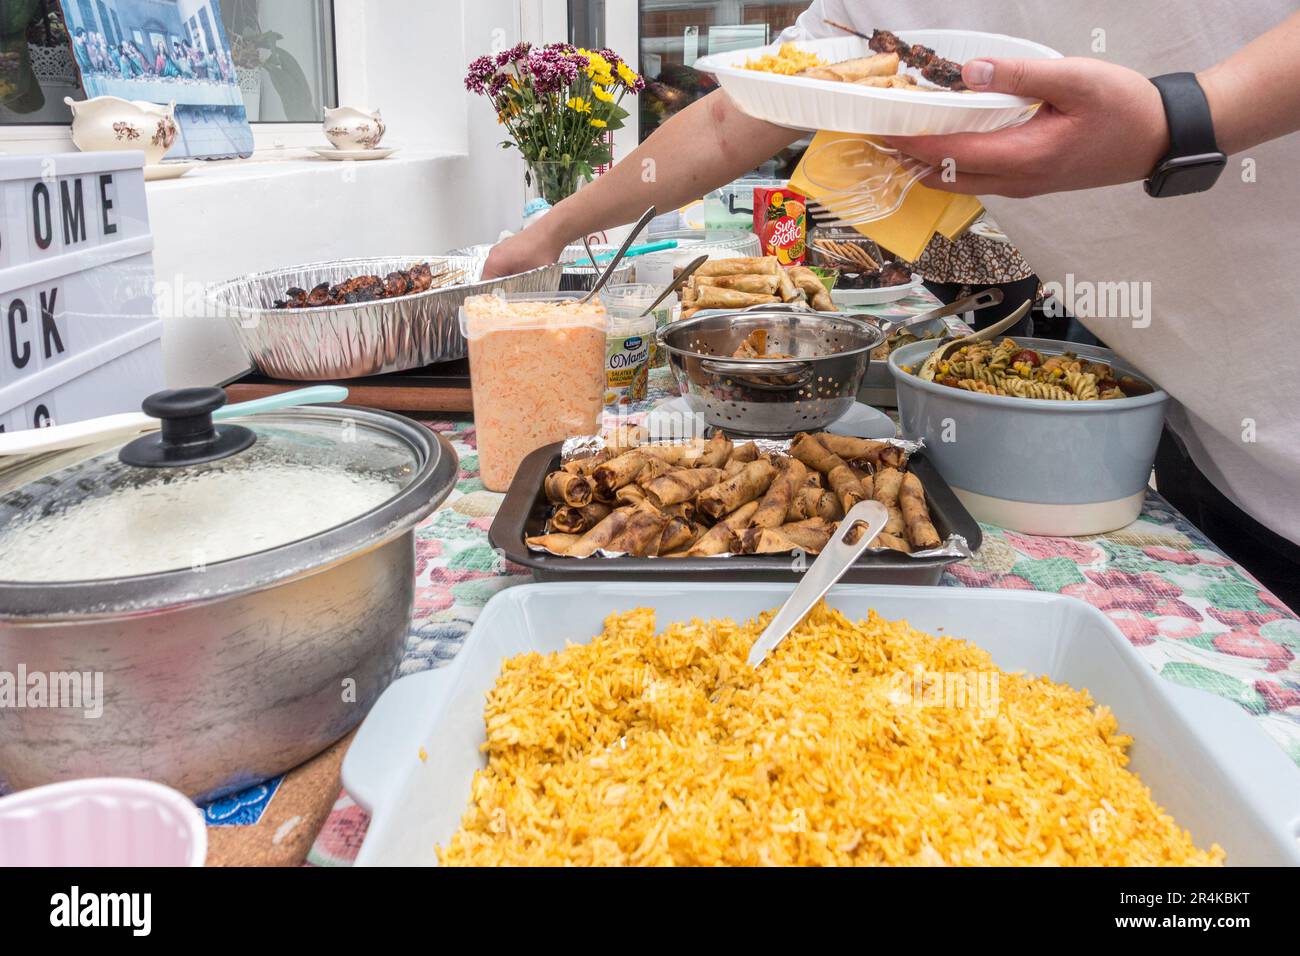 A self service buffet of Filipino dishes at a party with a wide selection of dishes u=including rice, spring roll and pasta salad Stock Photo